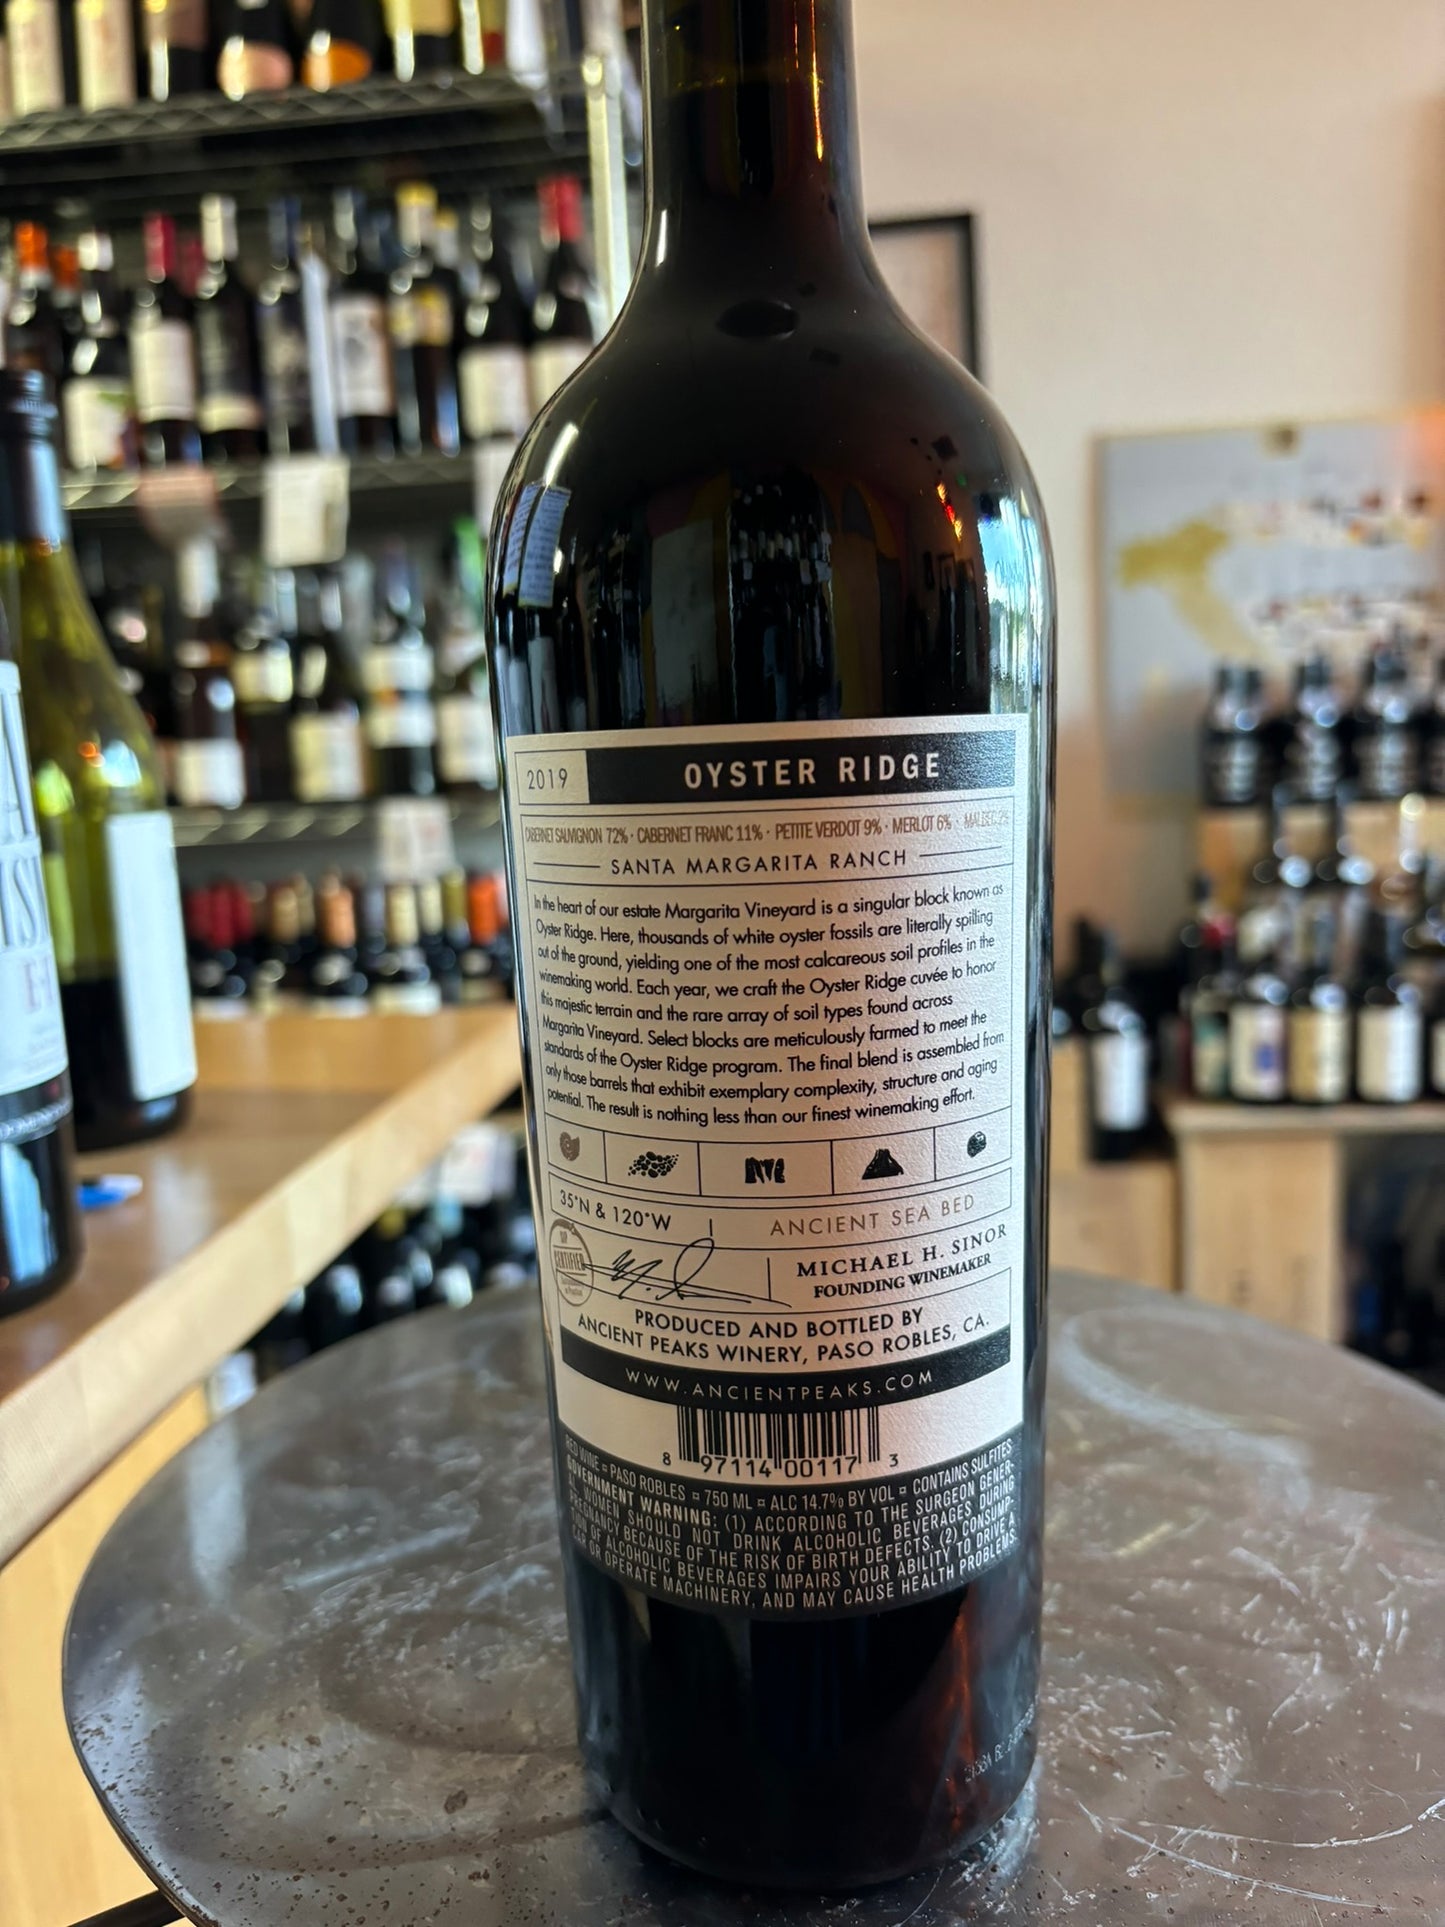 ANCIENT PEAKS 2019 Red Blend 'Oyster Ridge' (Paso Robles, California)